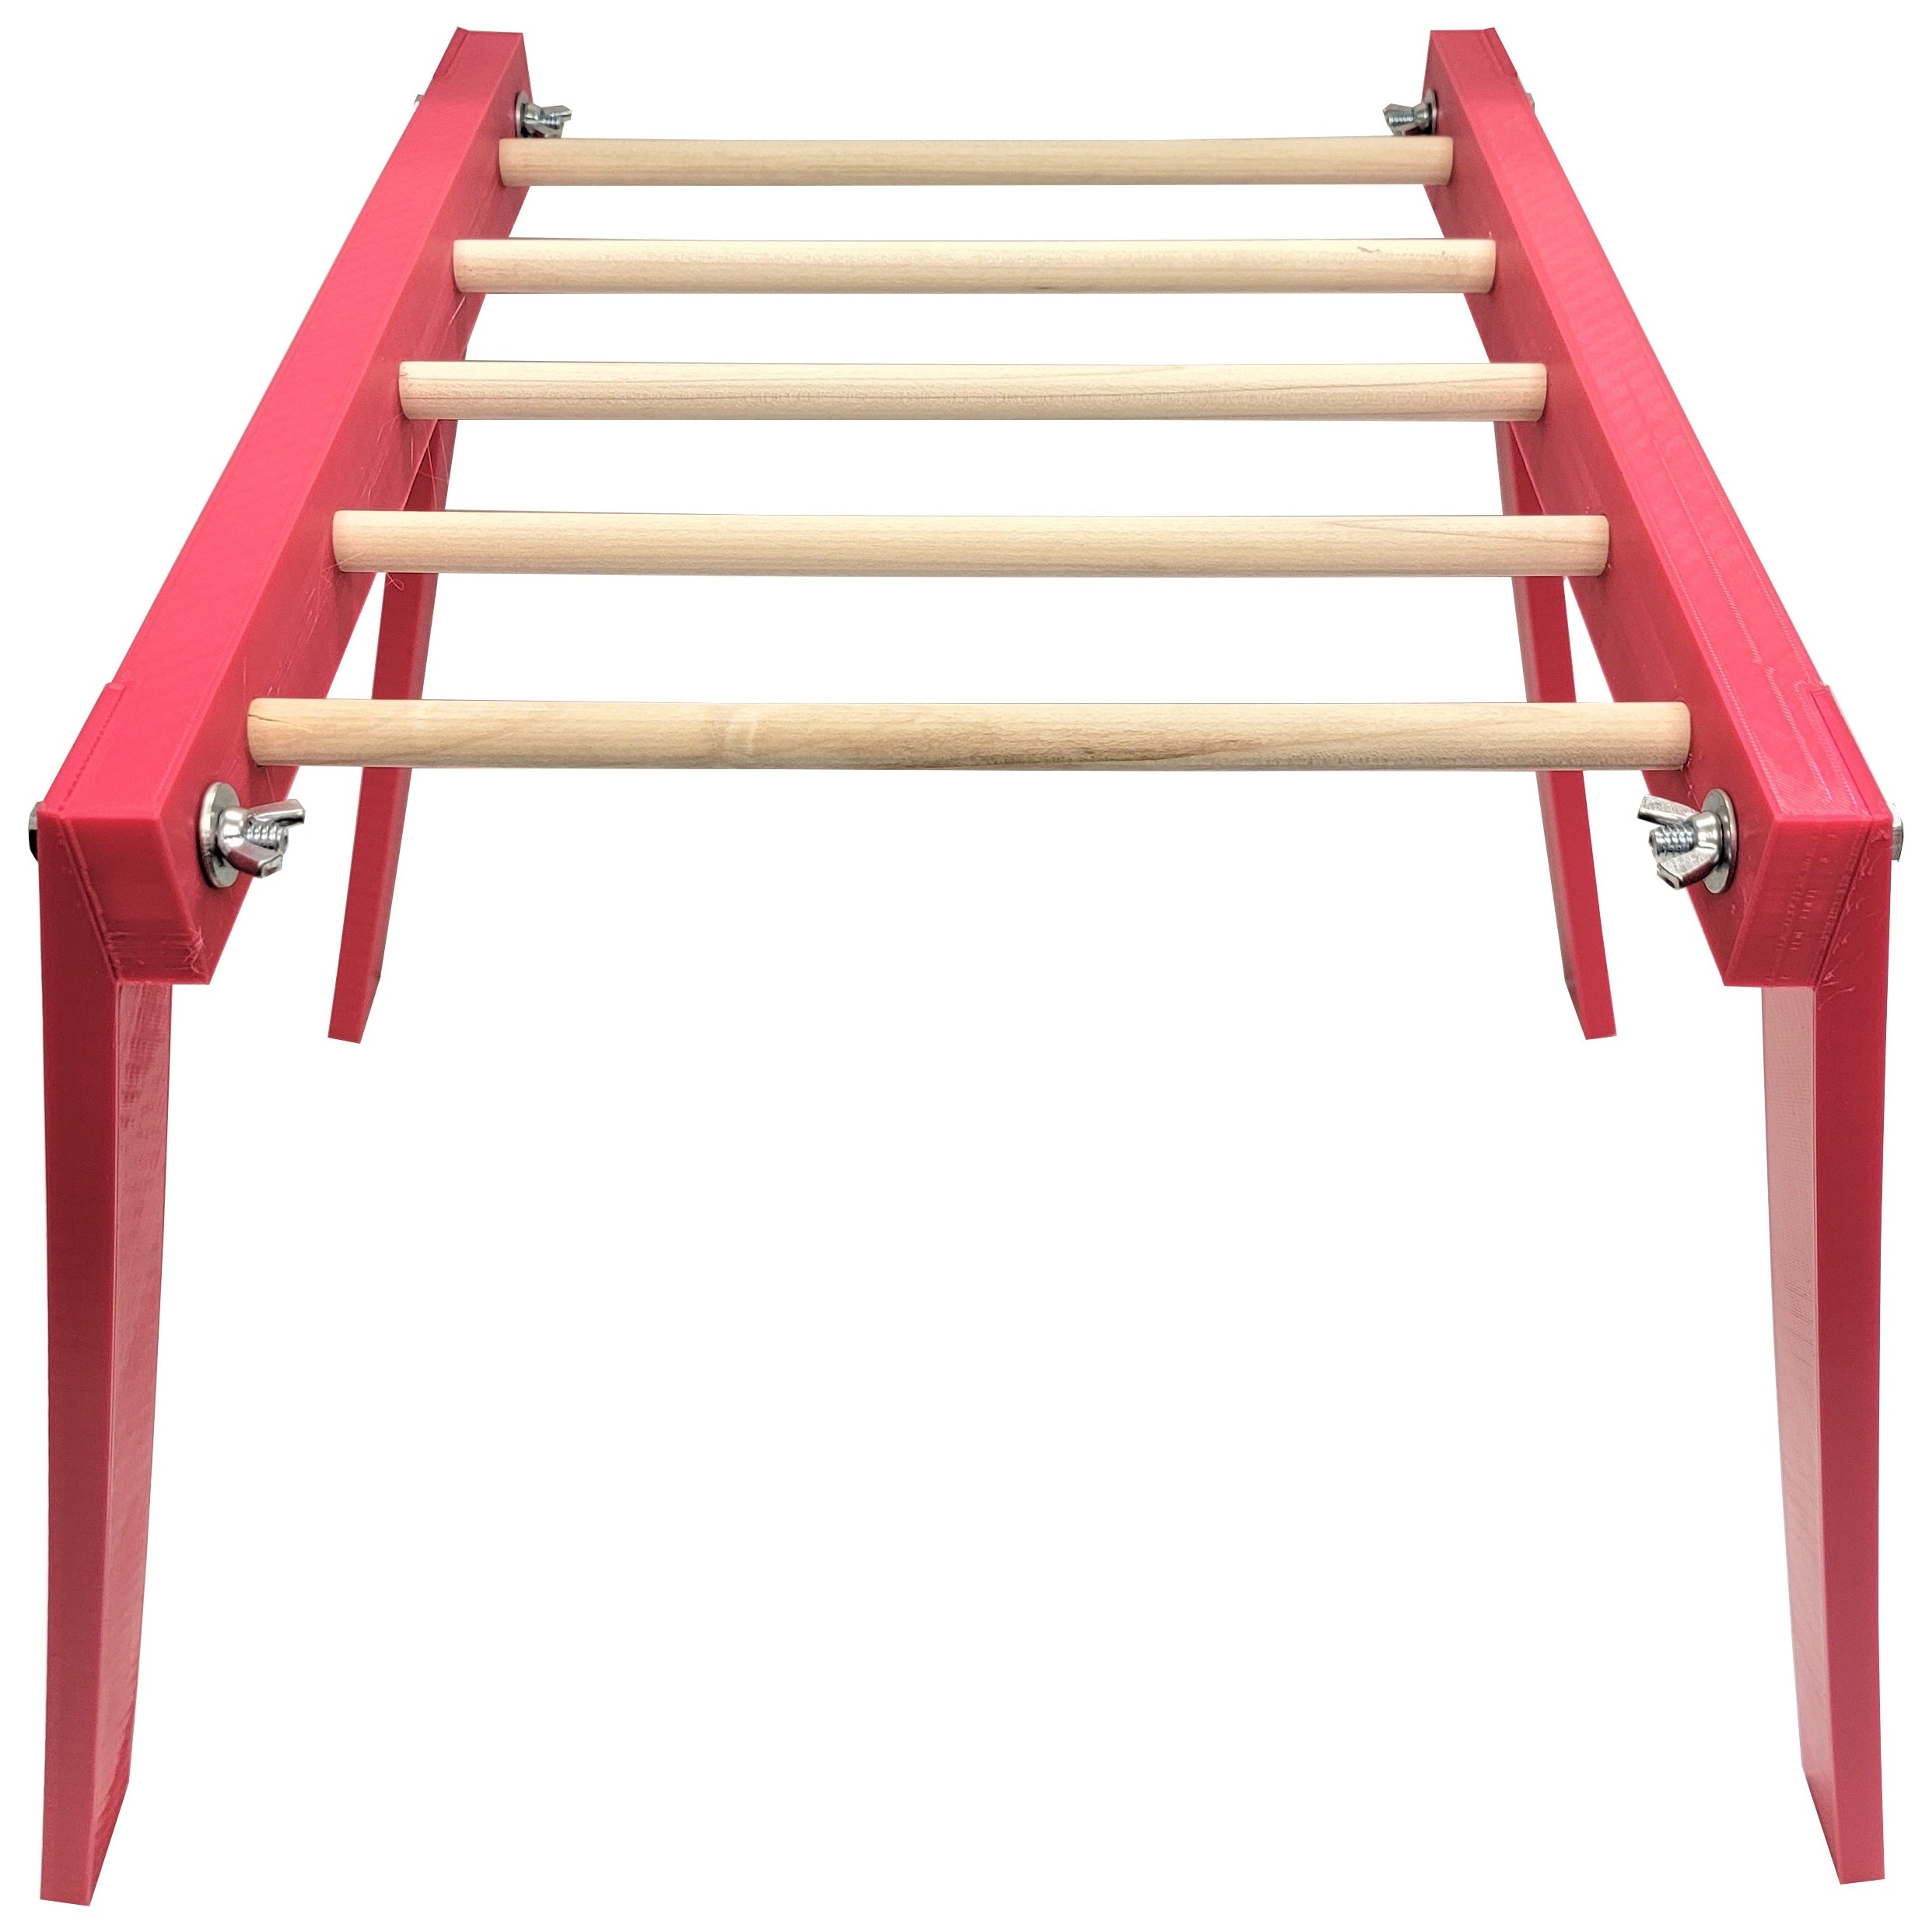 20.5 Inch Long Pink Chicken Monkey Bars Poultry Perch